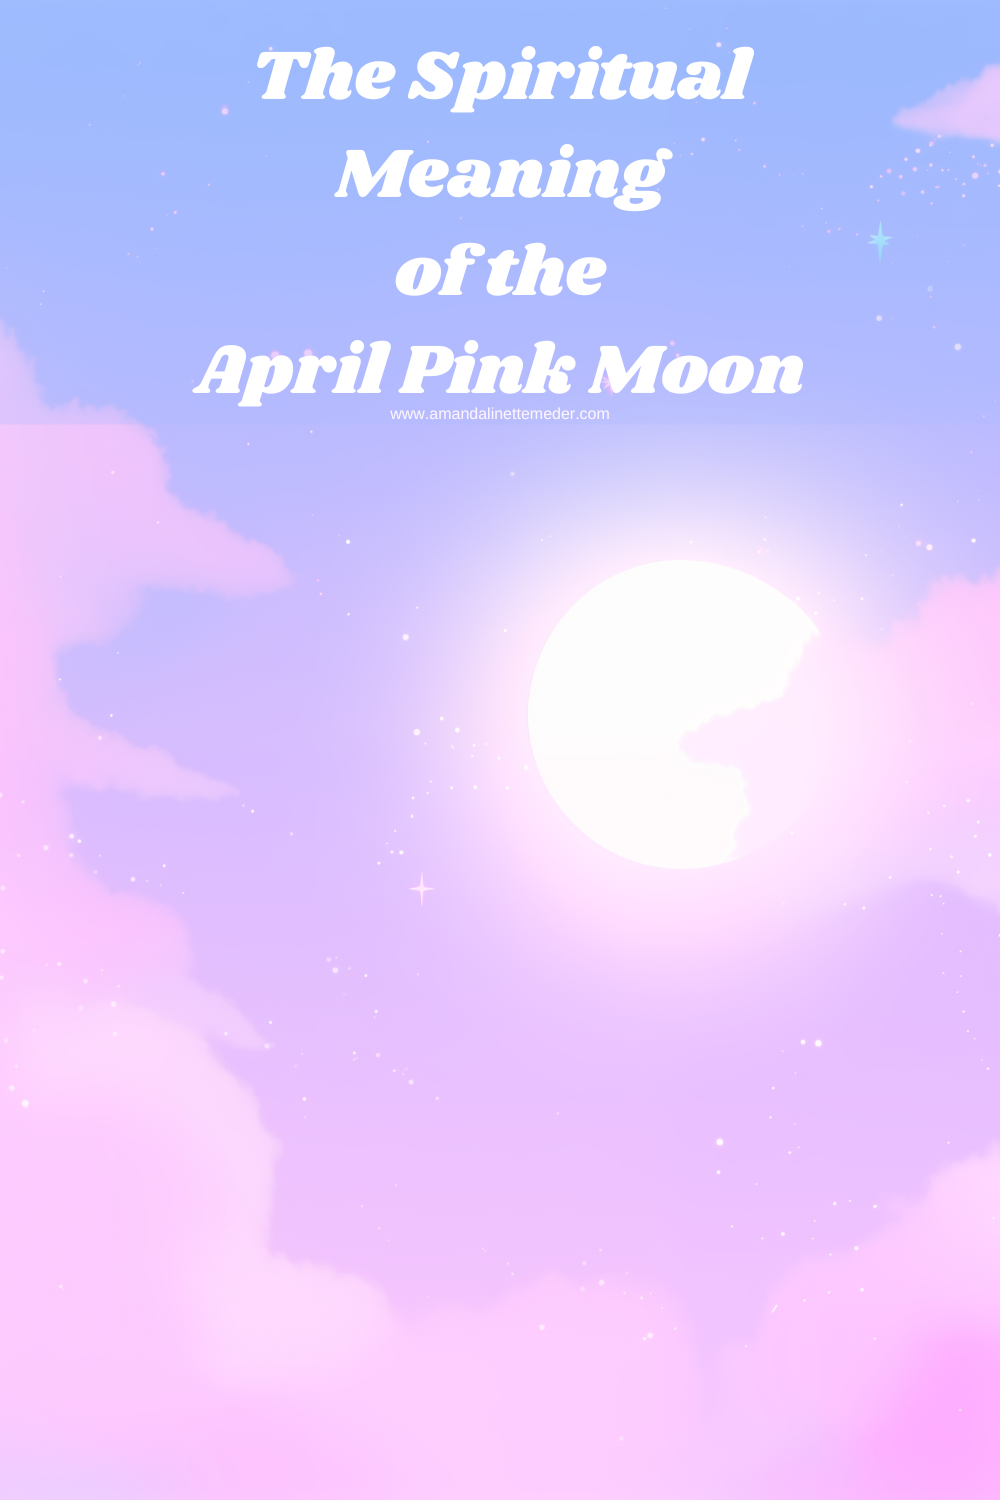 The Spiritual Meaning of the April Pink Moon